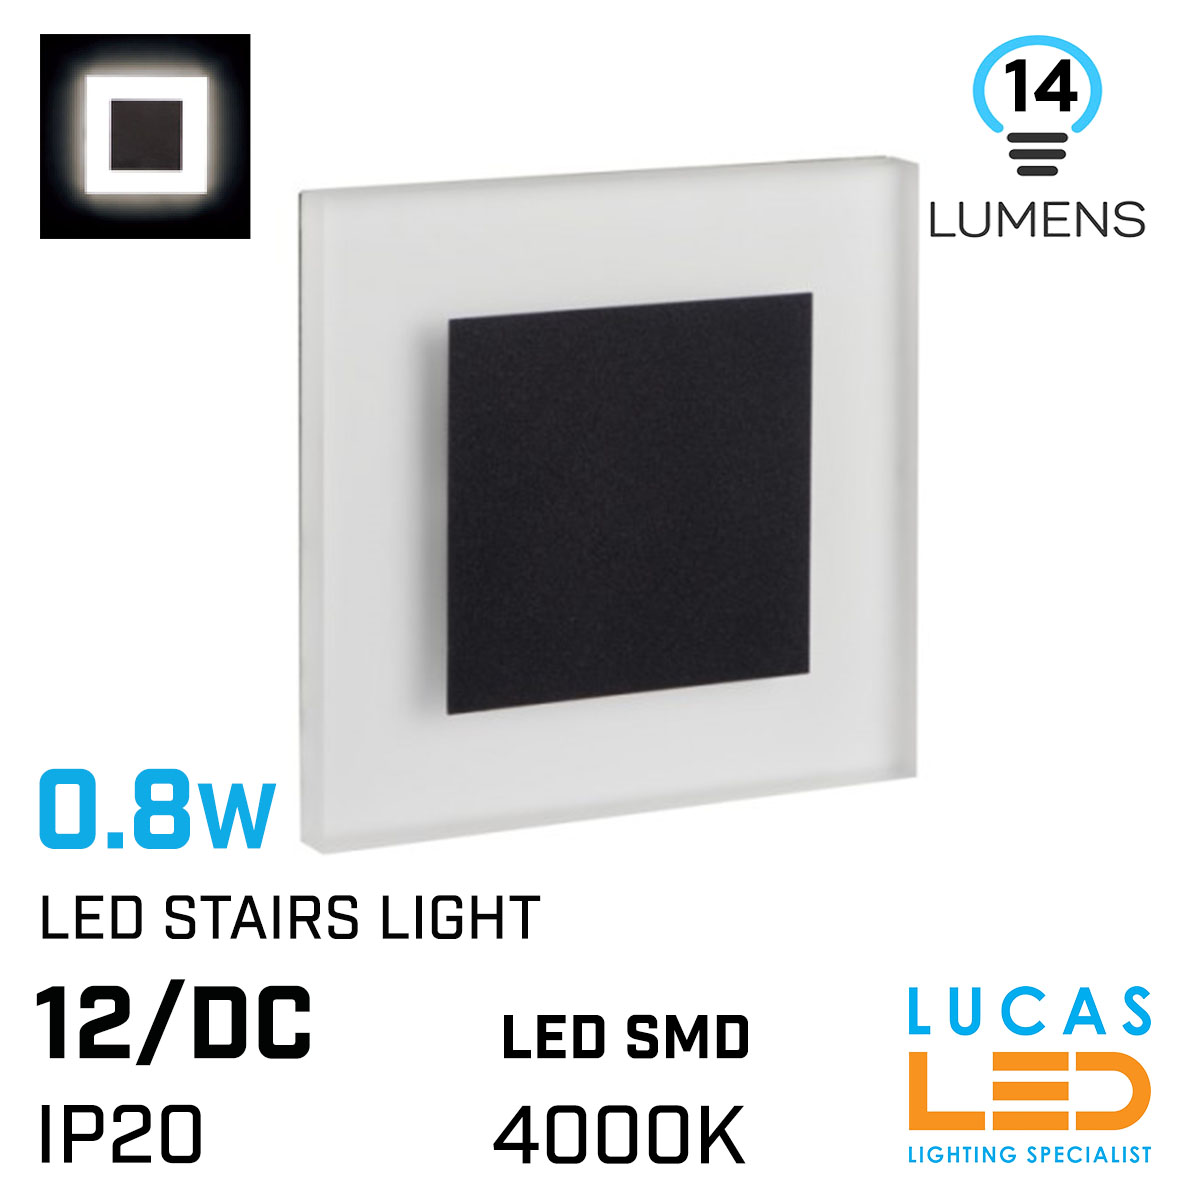 LED Wall / Stairs Lighting 0.8W - 4000K Natural White - 12V / DC - 14lm - IP20 - recessed - APUS